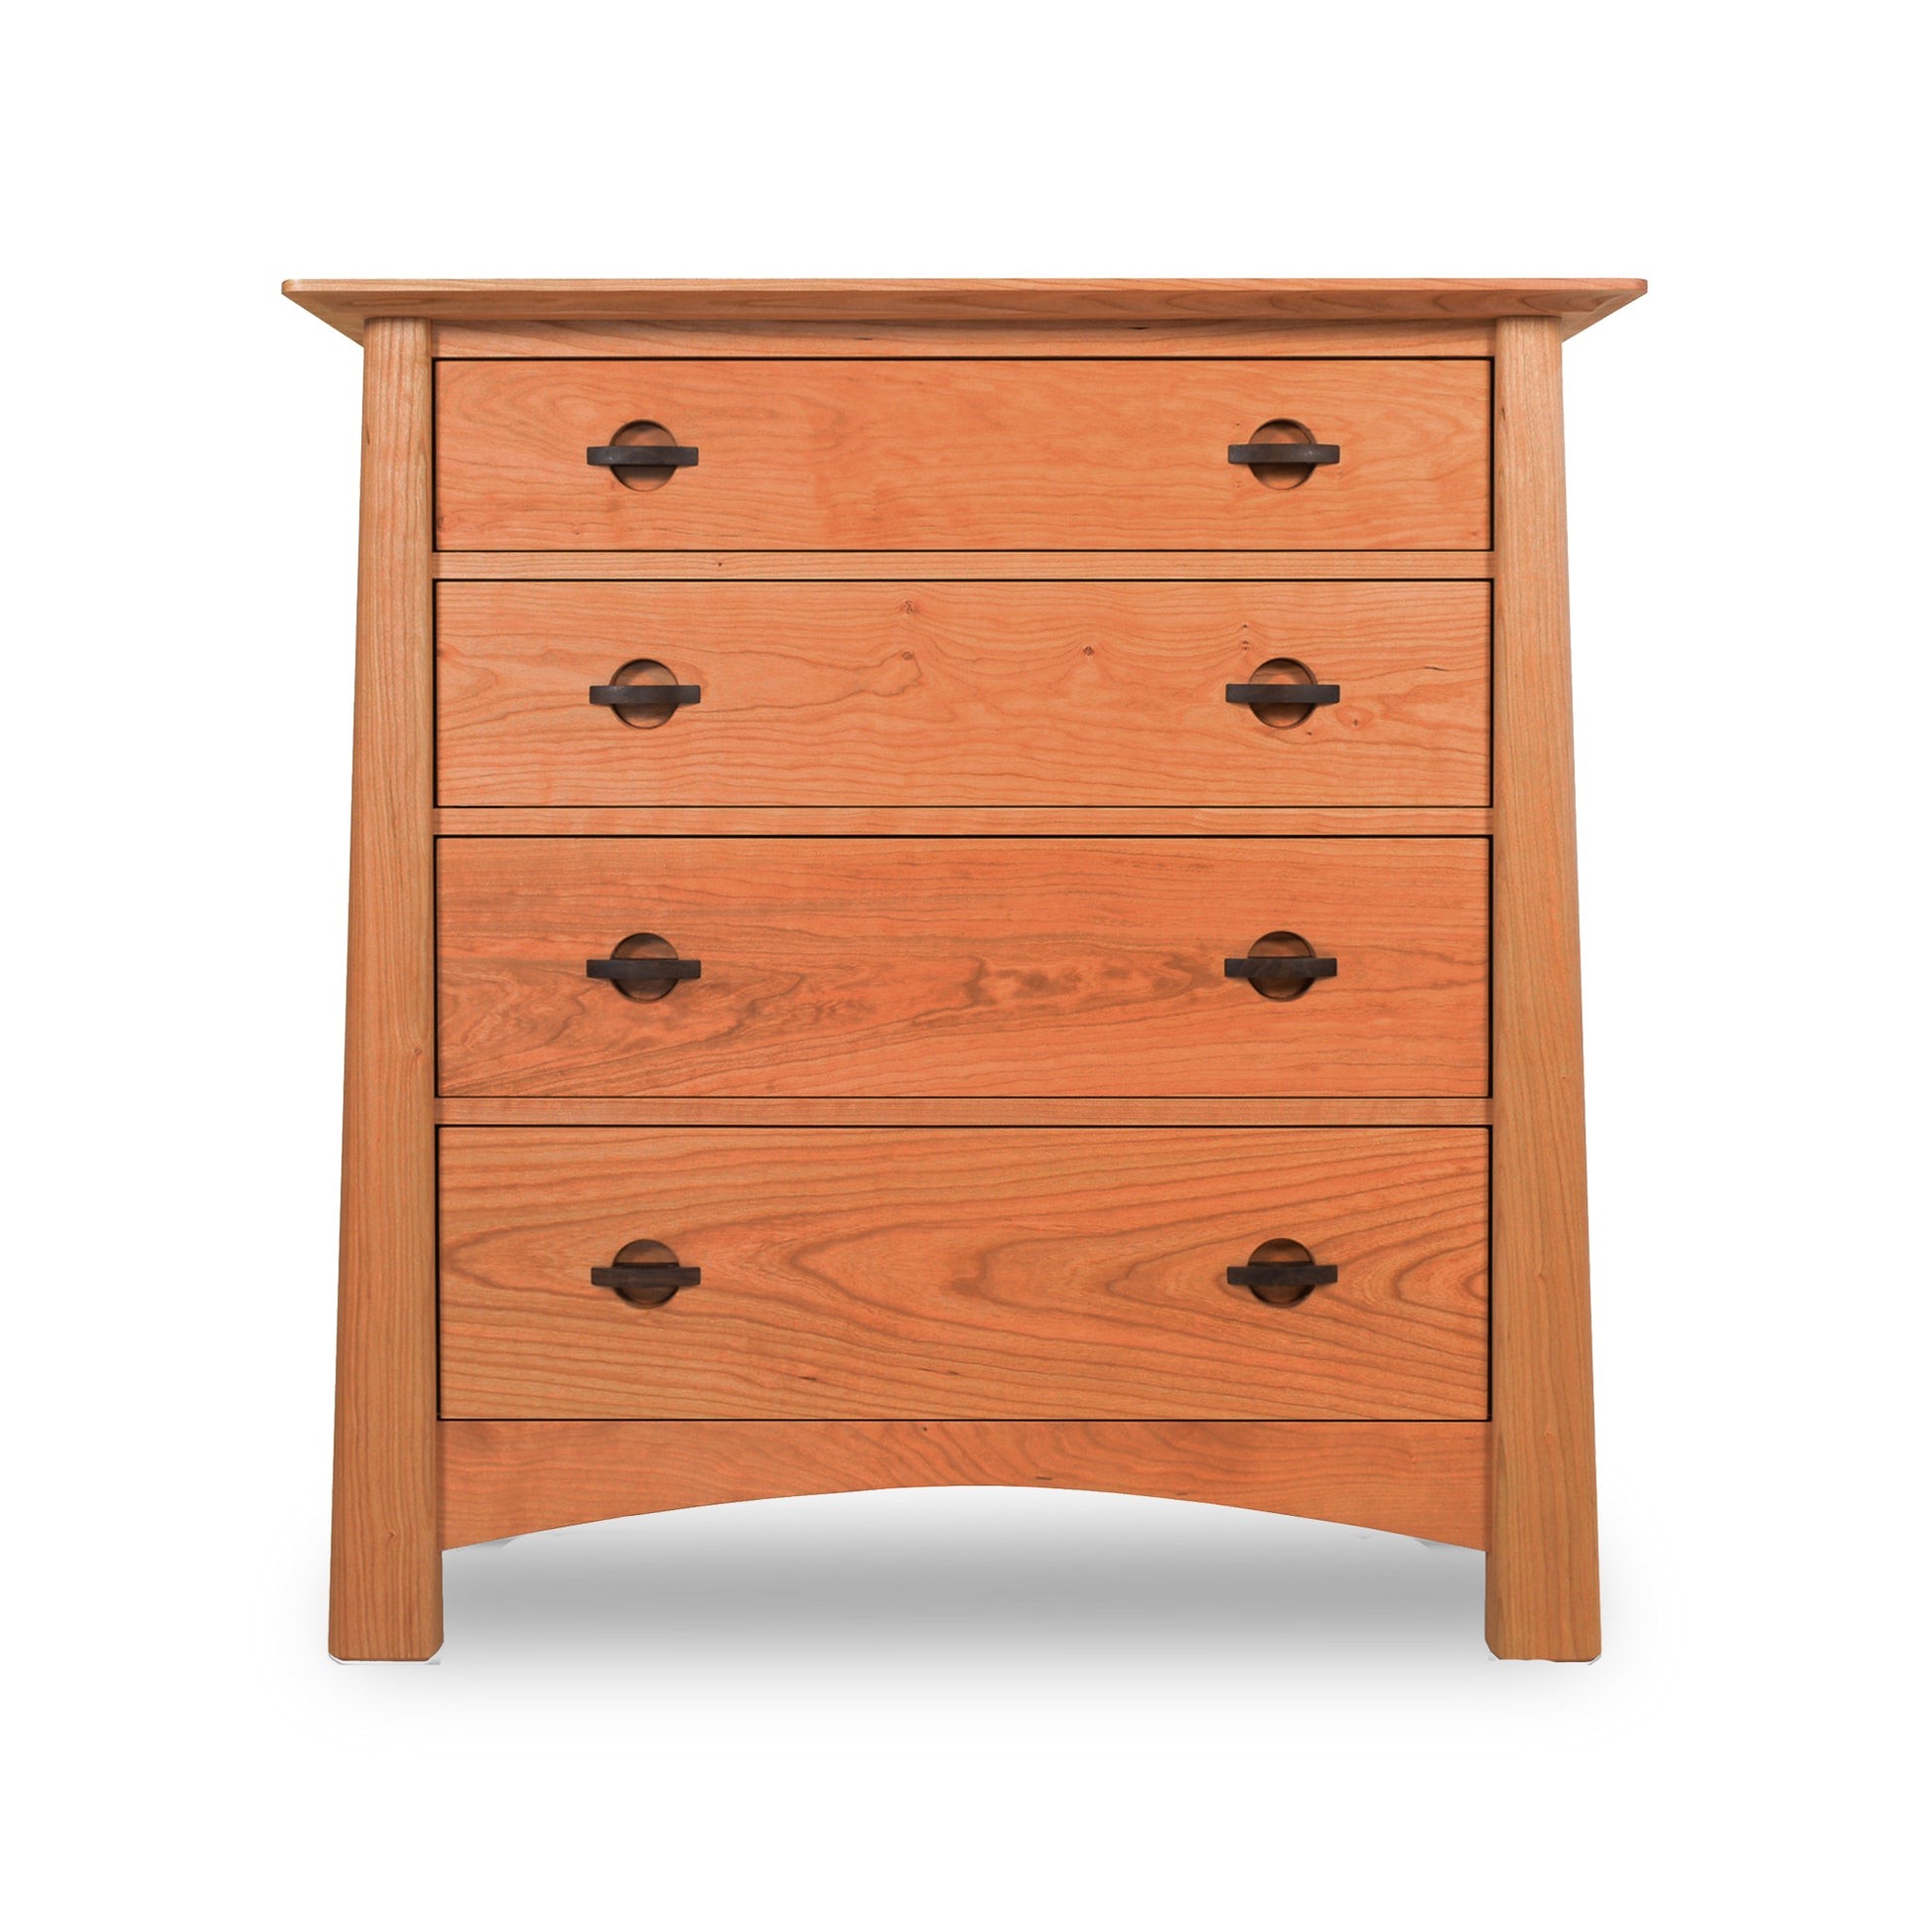 A Maple Corner Woodworks Cherry Moon 4-Drawer Chest with round knobs on a white background.